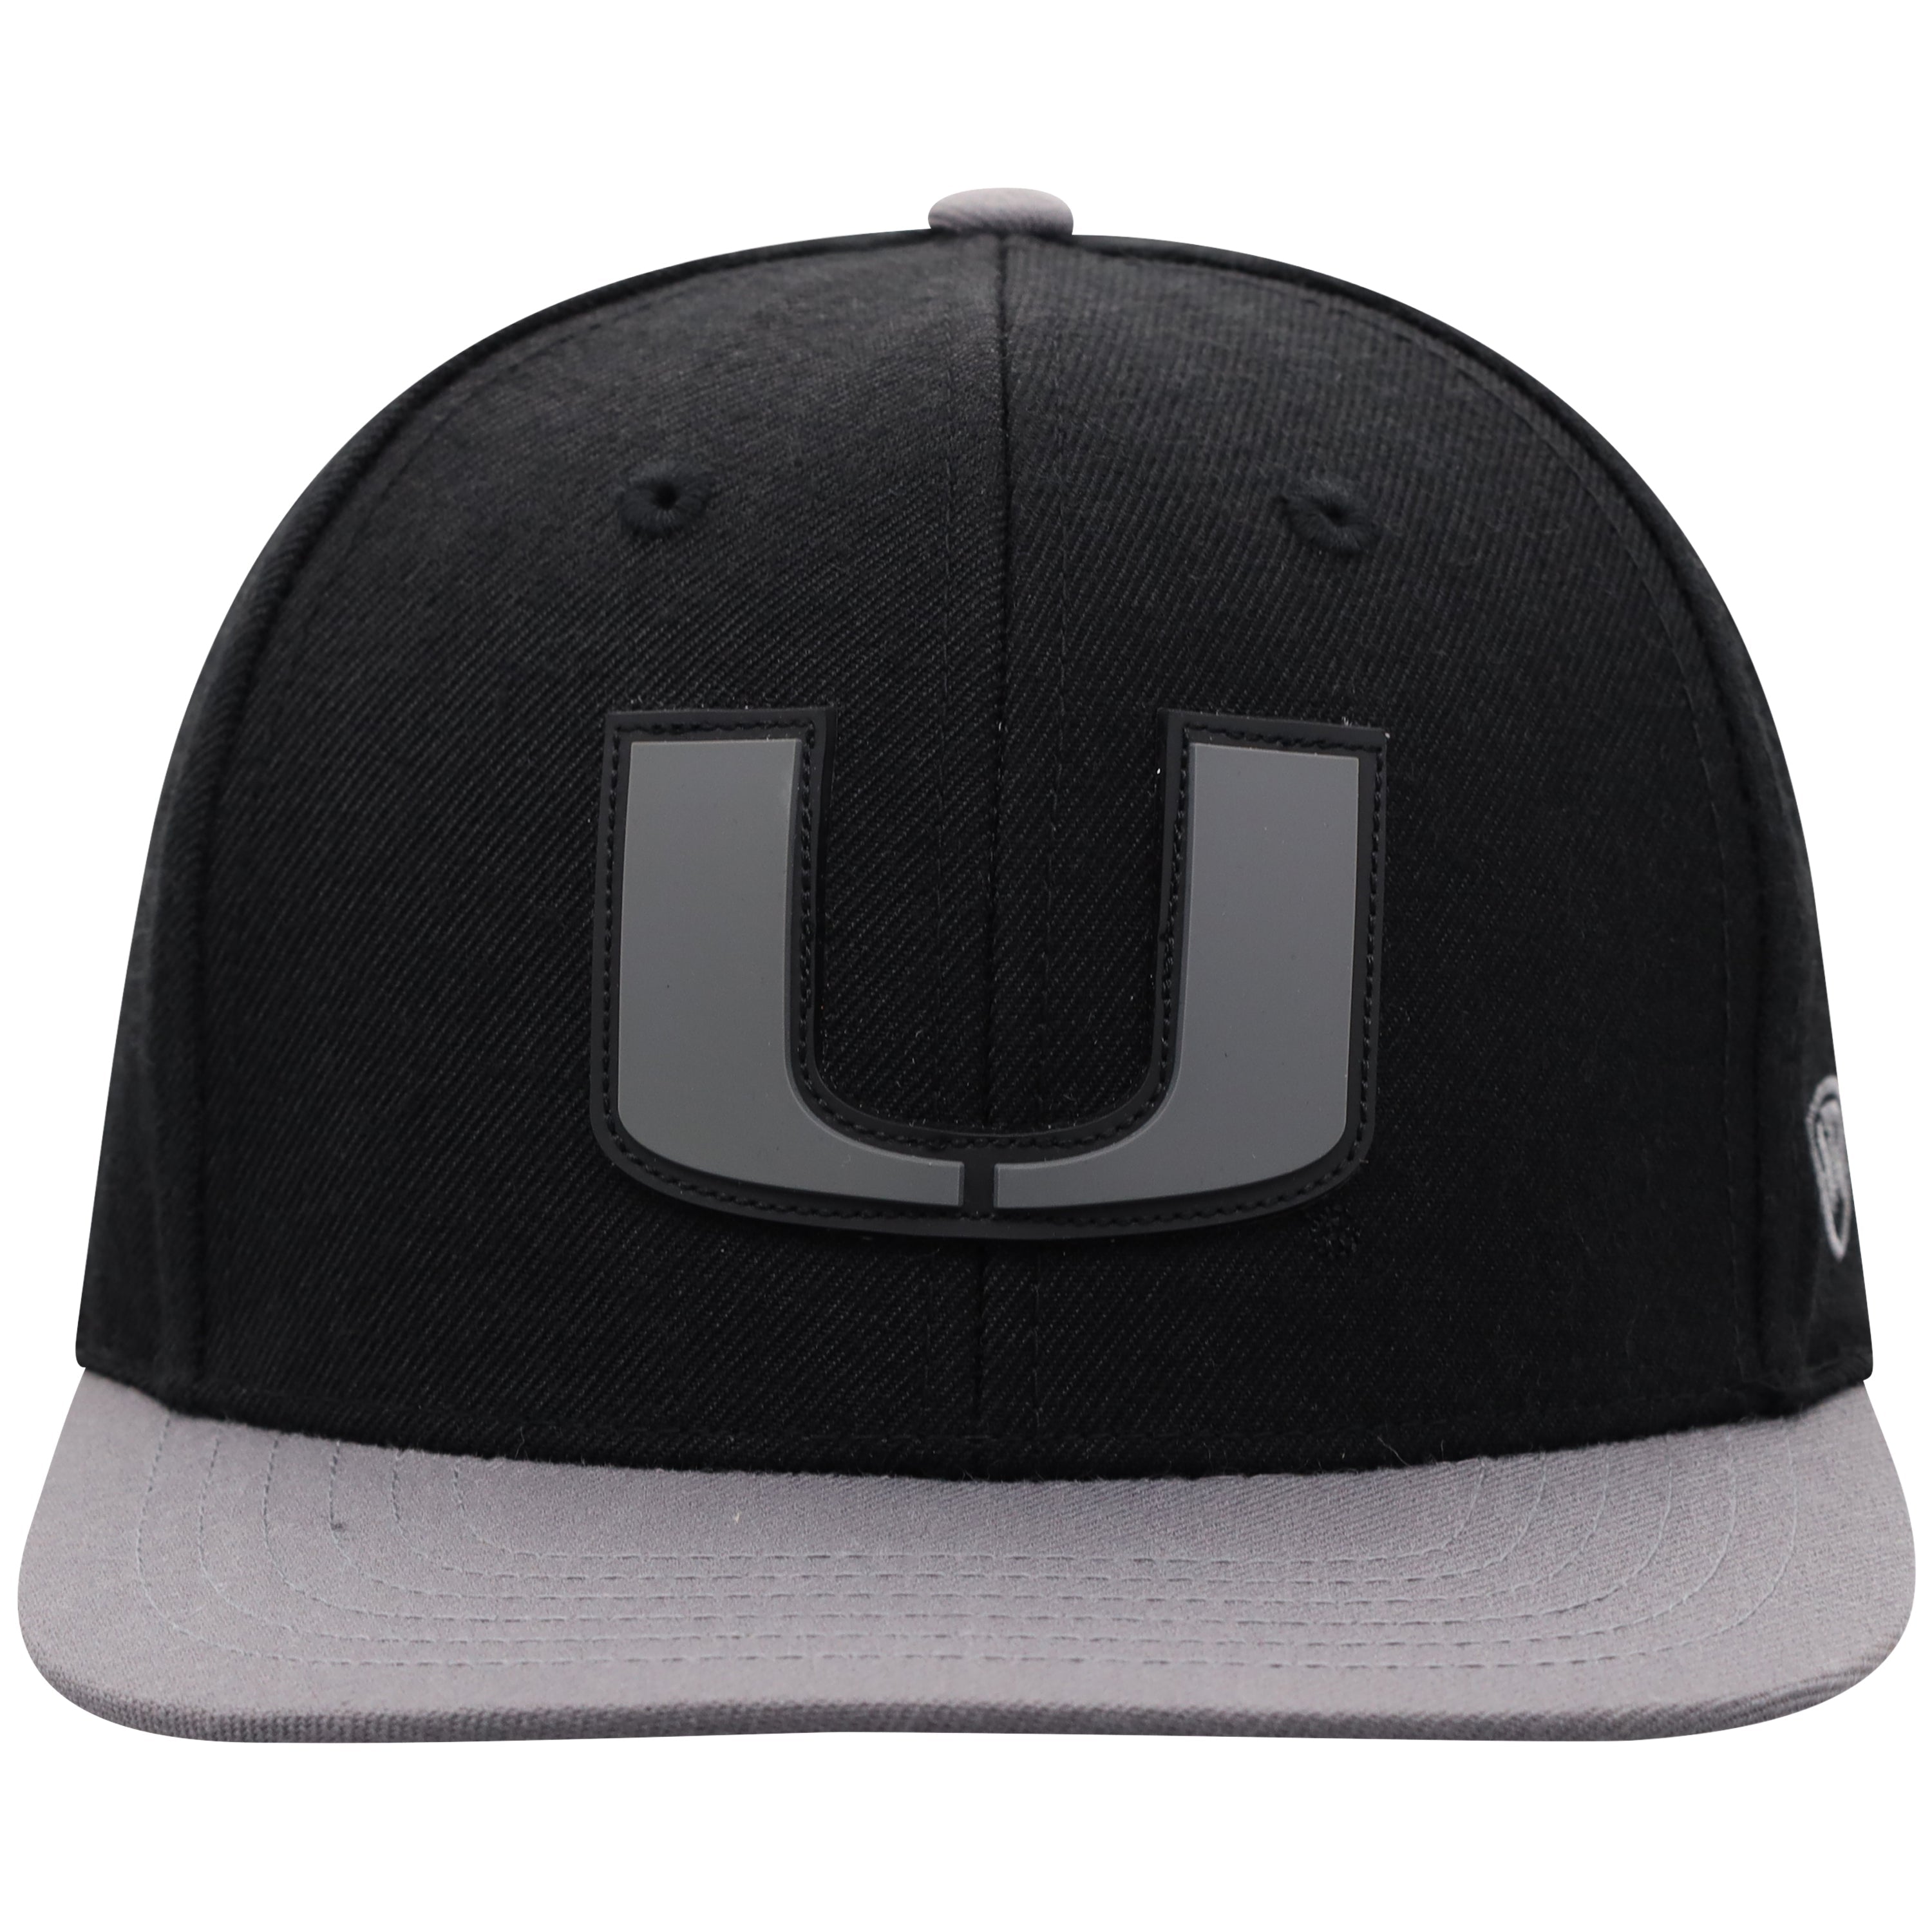 Miami Hurricanes TOW Atticus Youth Snapback Two-Tone Hat -Black/Silver